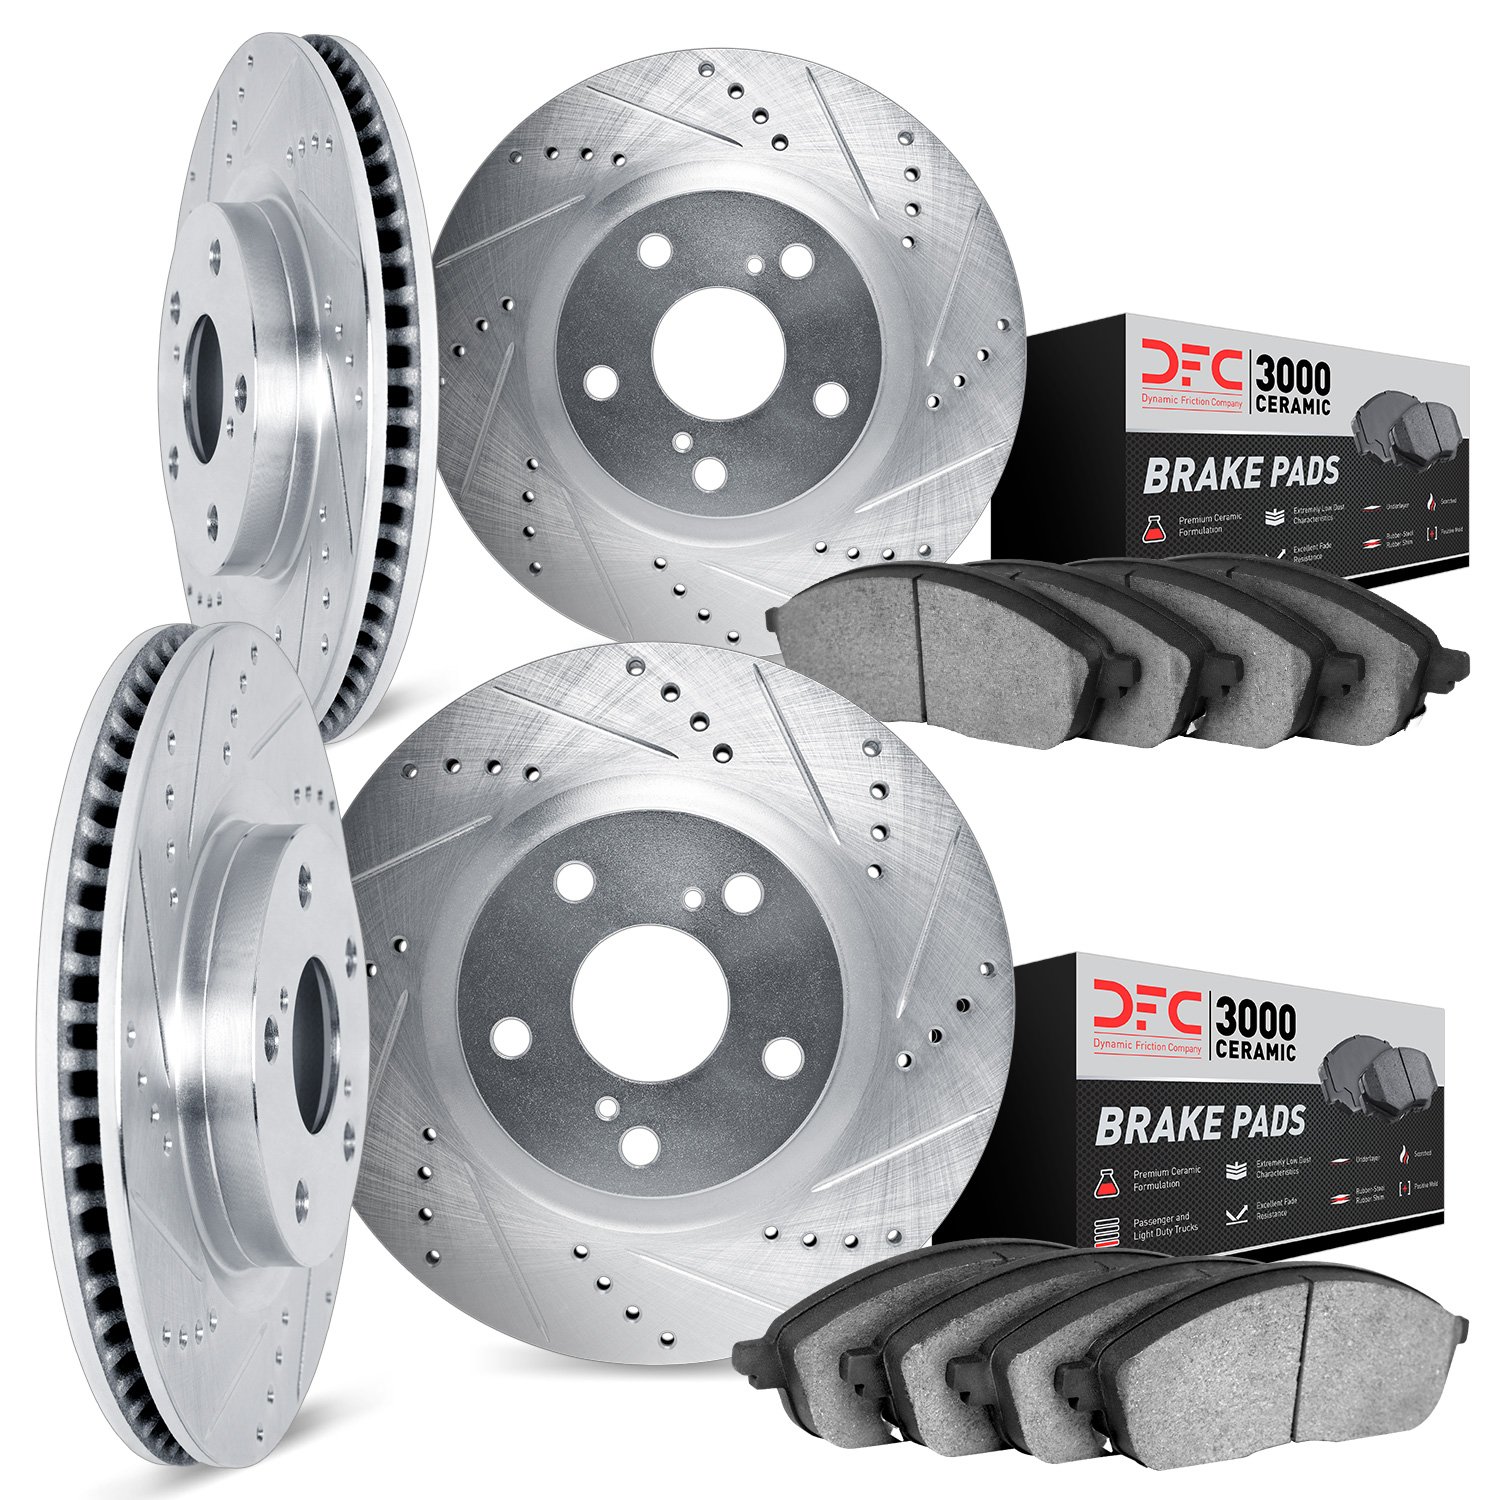 7304-40027 Drilled/Slotted Brake Rotor with 3000-Series Ceramic Brake Pads Kit [Silver], 2006-2018 Mopar, Position: Front and Re